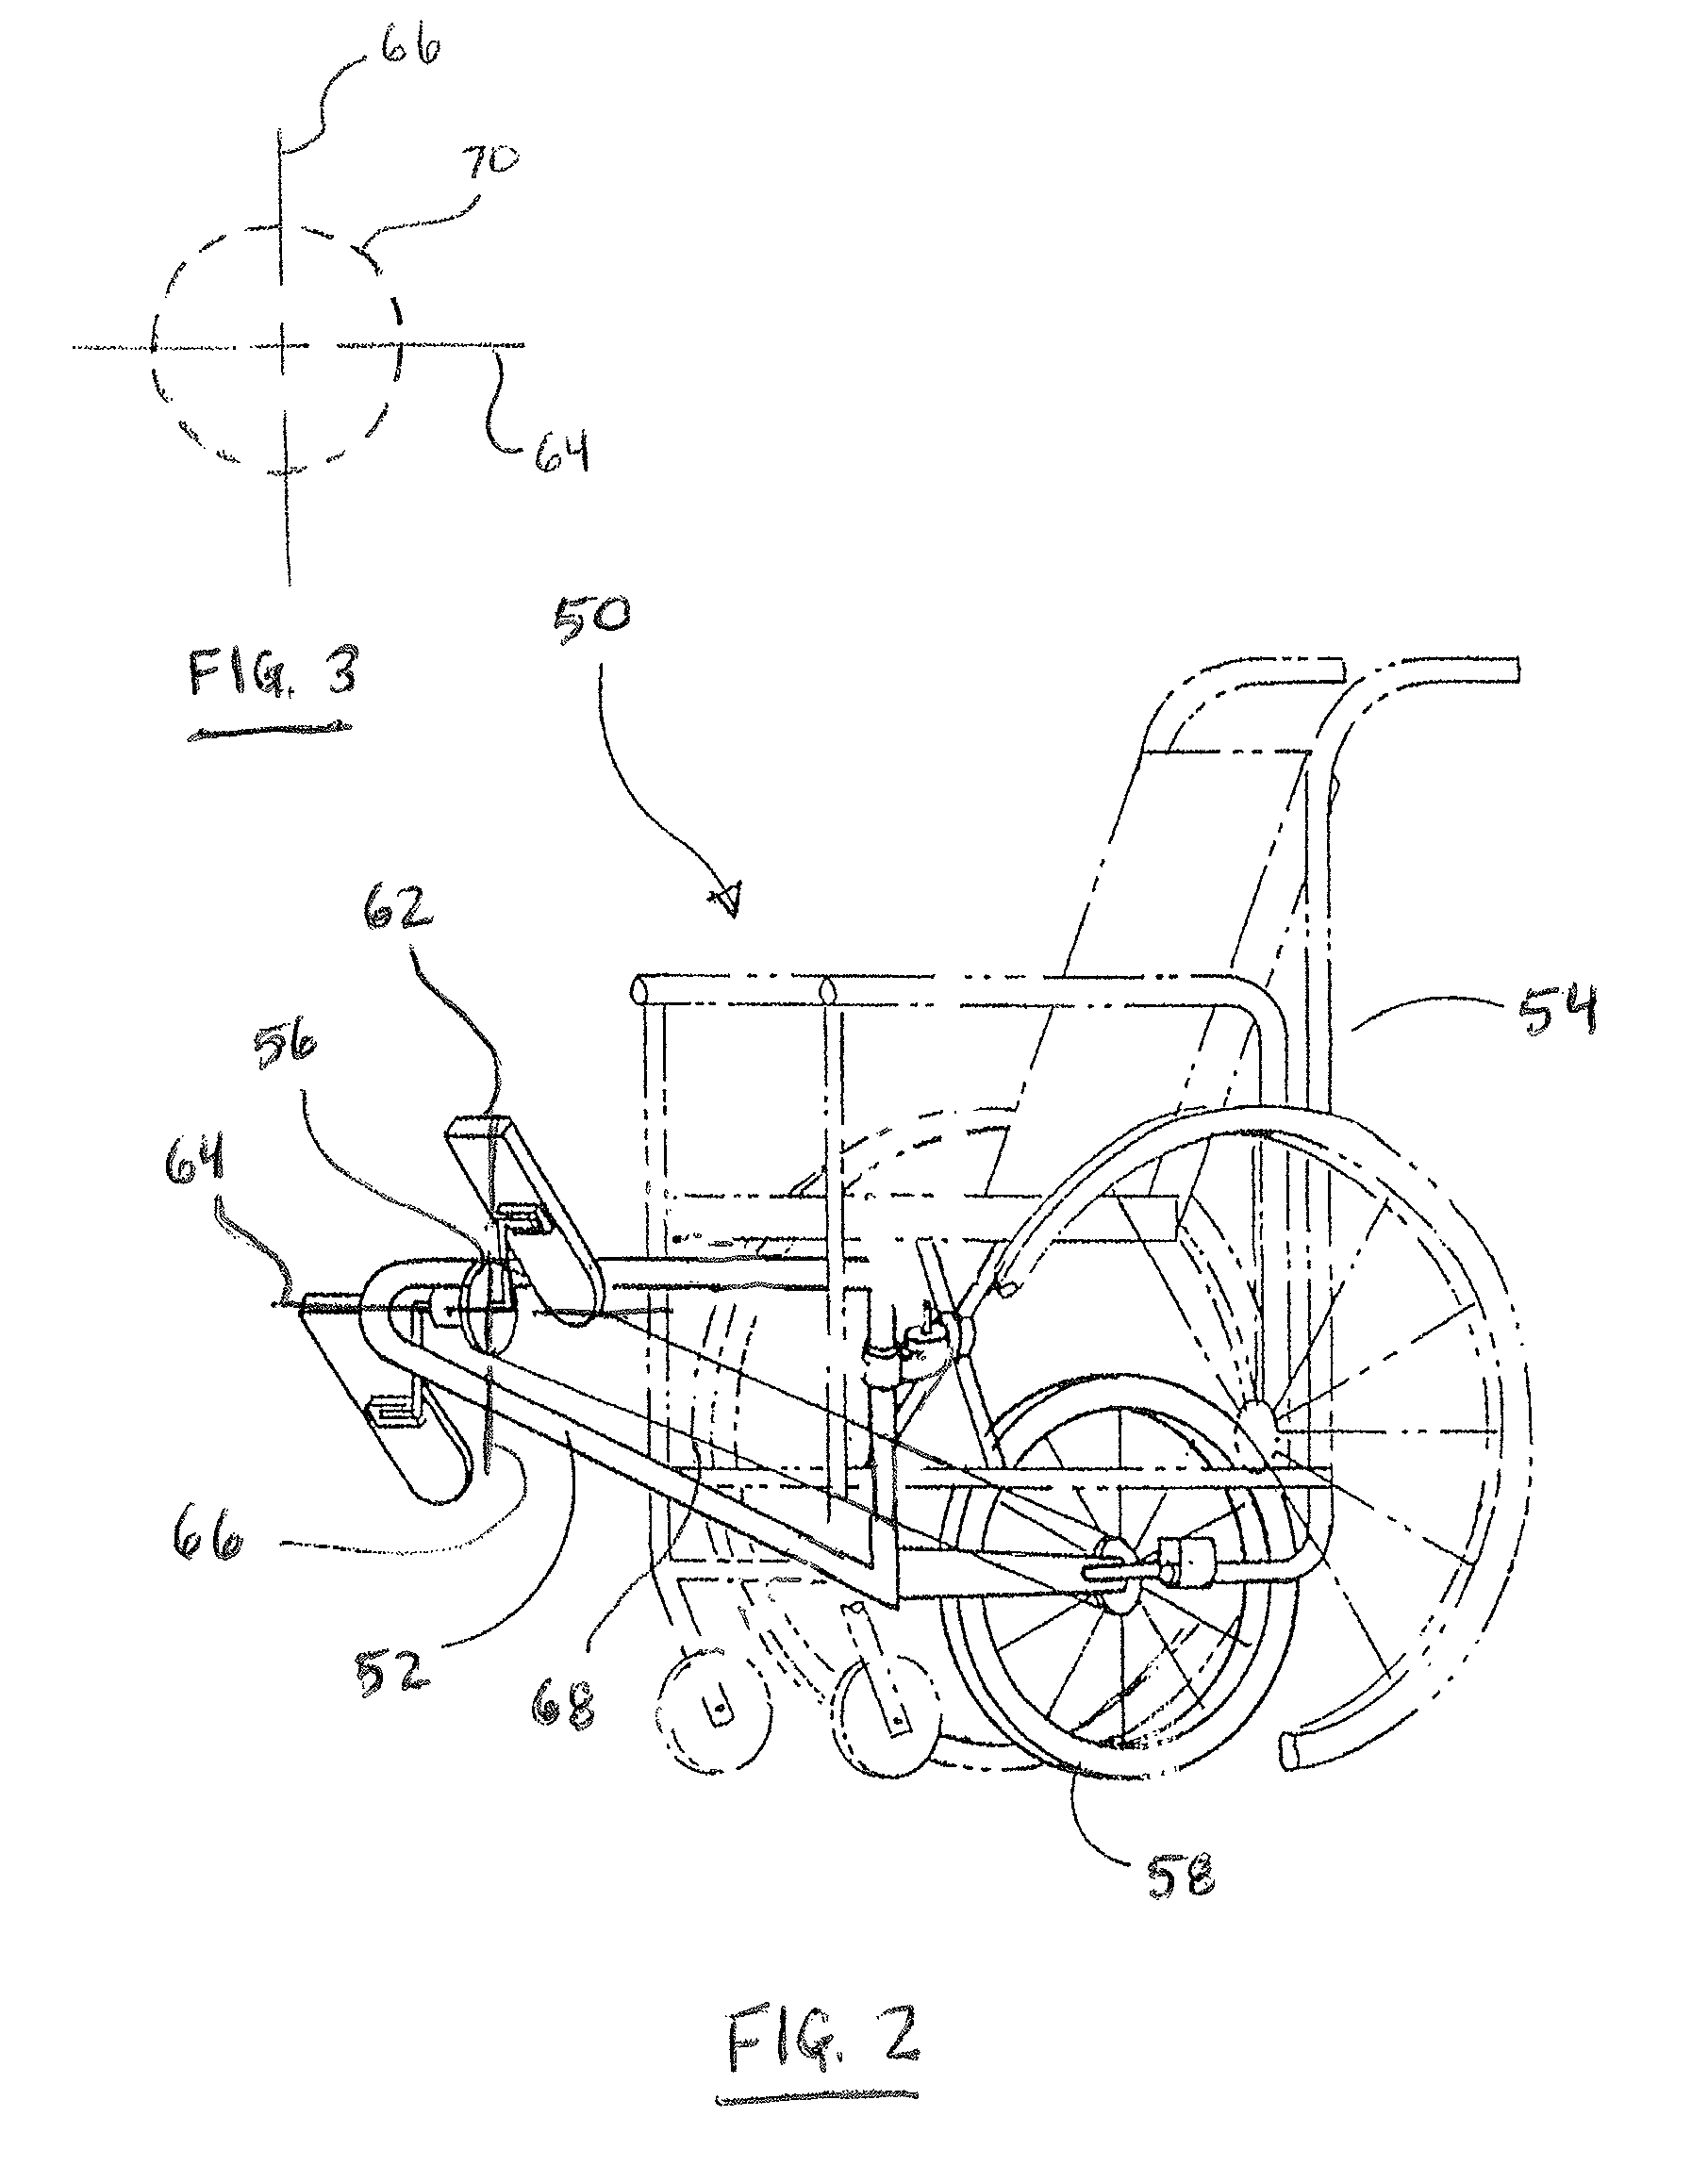 Atrophy-reducing movable foot support apparatus